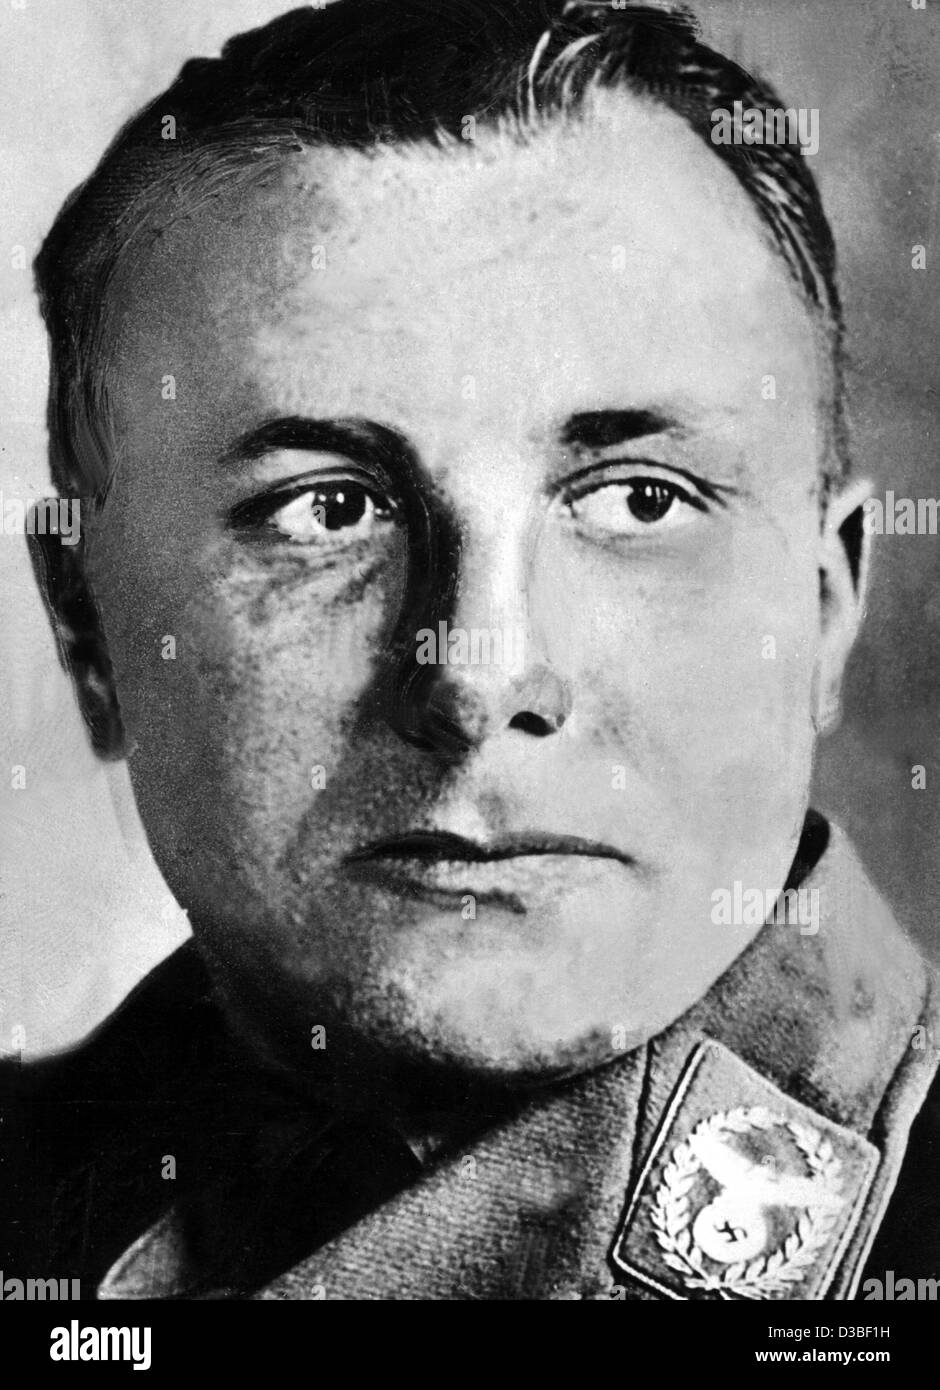 (dpa files) - An undated photo shows Martin Bormann, Adolf Hitler's secretary. Bormann was with Hitler and Goebbels in Hitler's subterranean bunker on 30 April 1945 and since was presumed dead or captured. Although his whereabouts were unconfirmed at the time of the trial, he was one of the principl Stock Photo